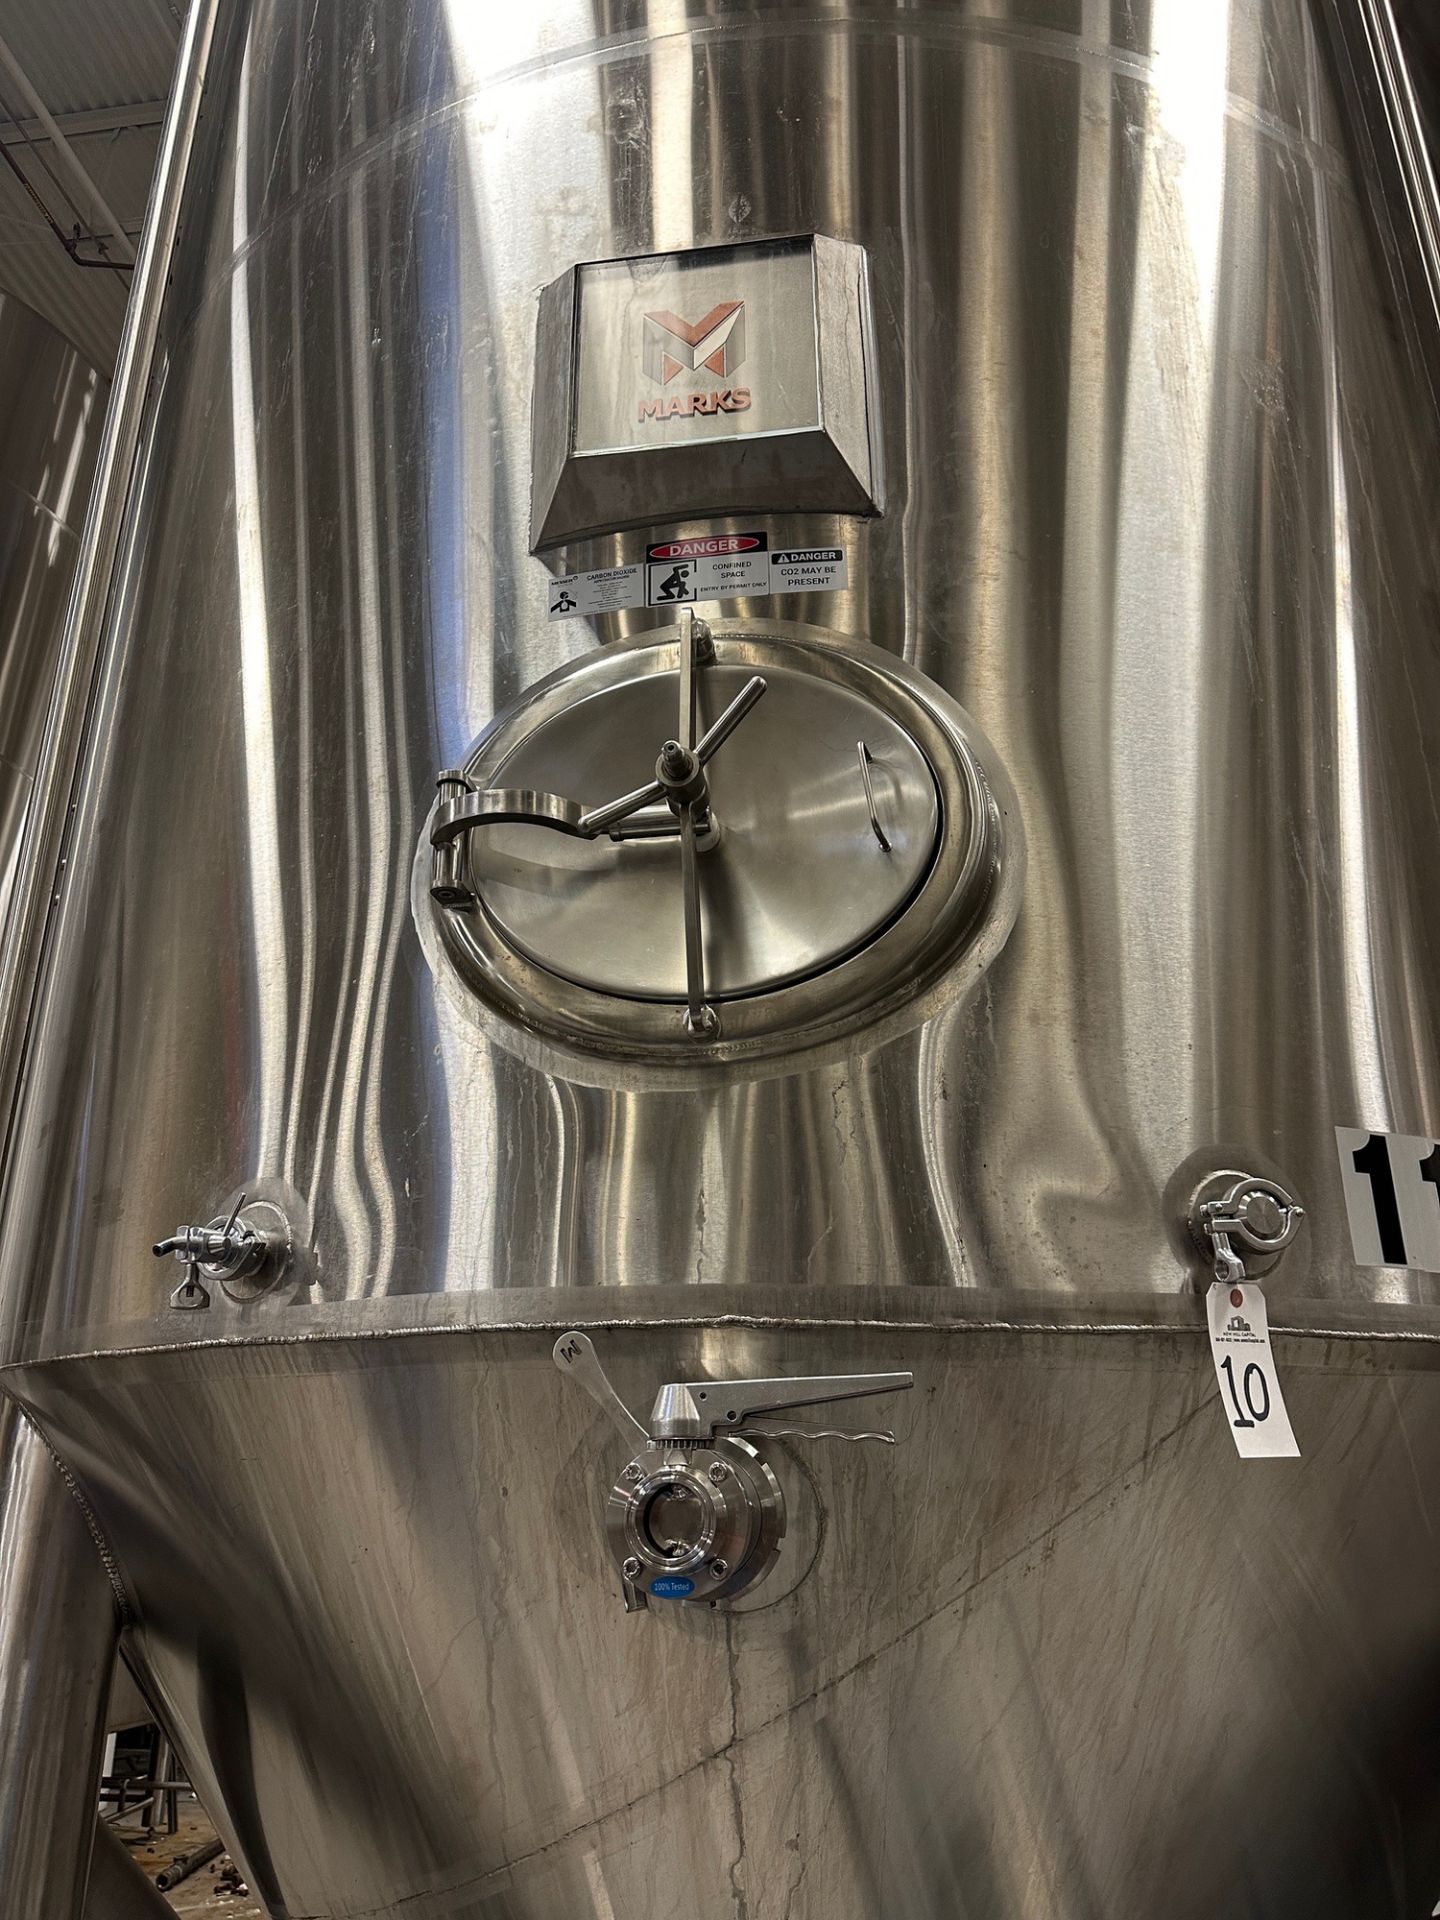 (1 of 8) 2020 Marks 132 BBL FV / 175 BBL or 5,400 Gal Max Capacity Jacketed Stainless Steel Ferm - Image 2 of 5